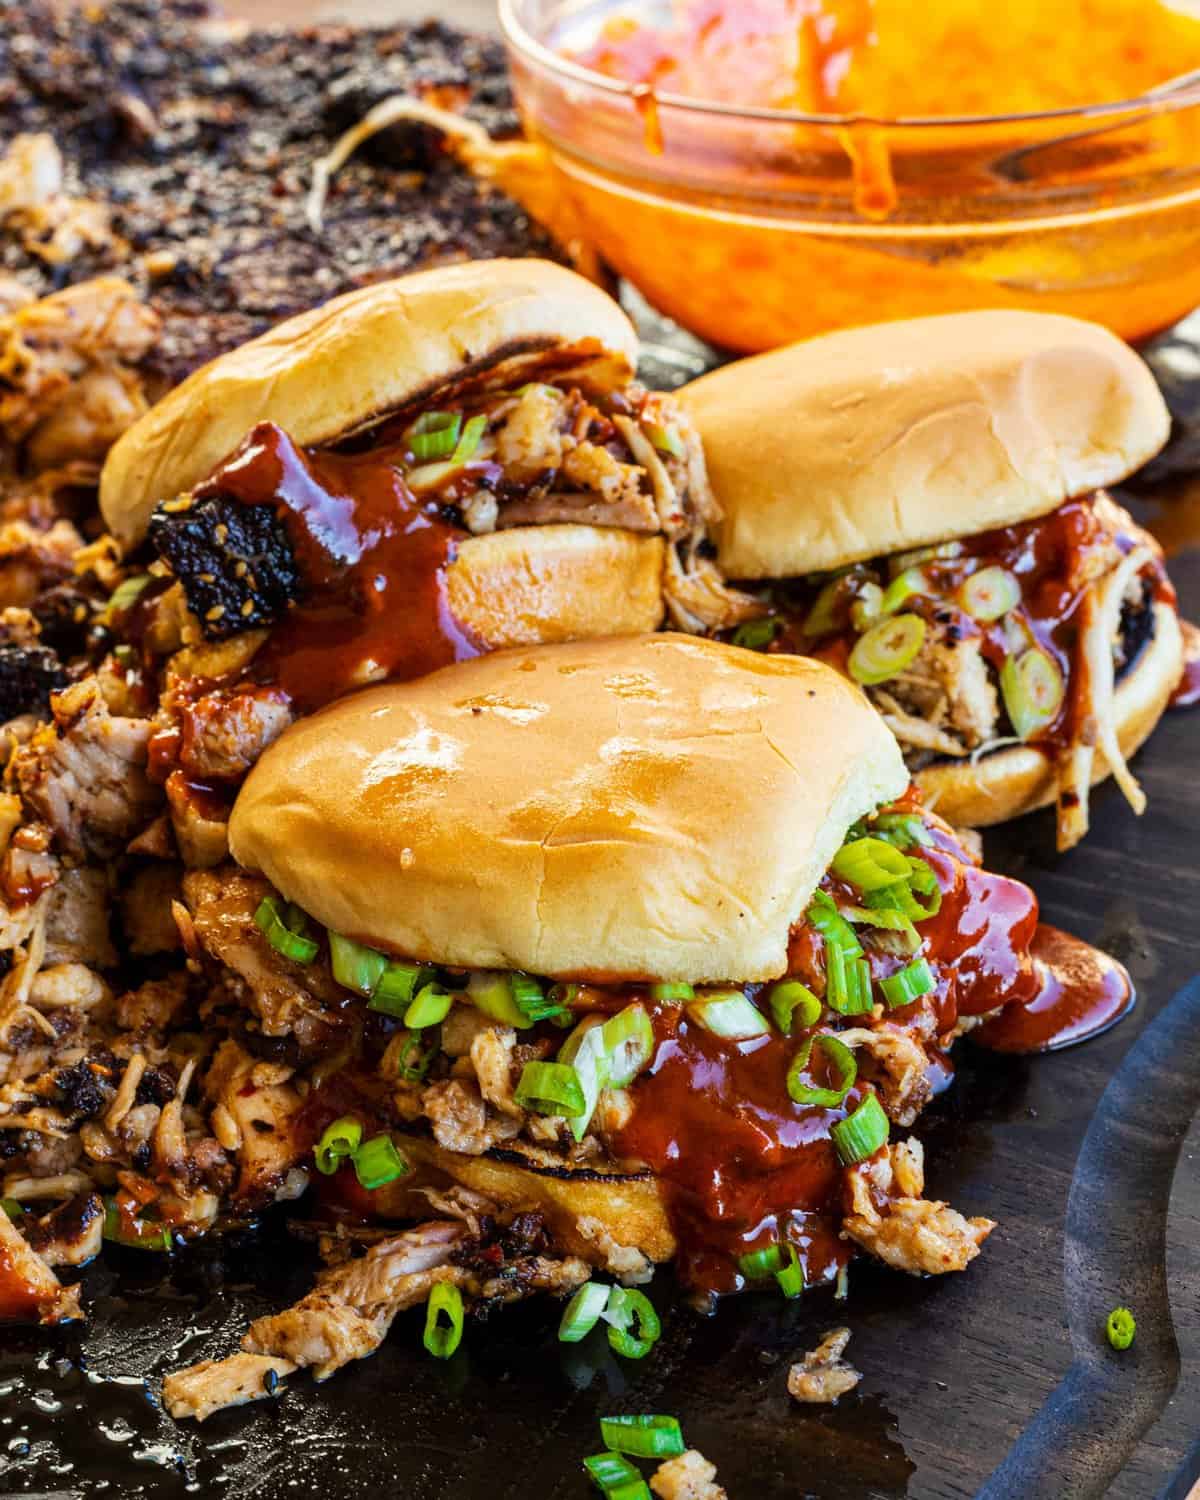 Korean Pulled Pork Belly on the buns and served.